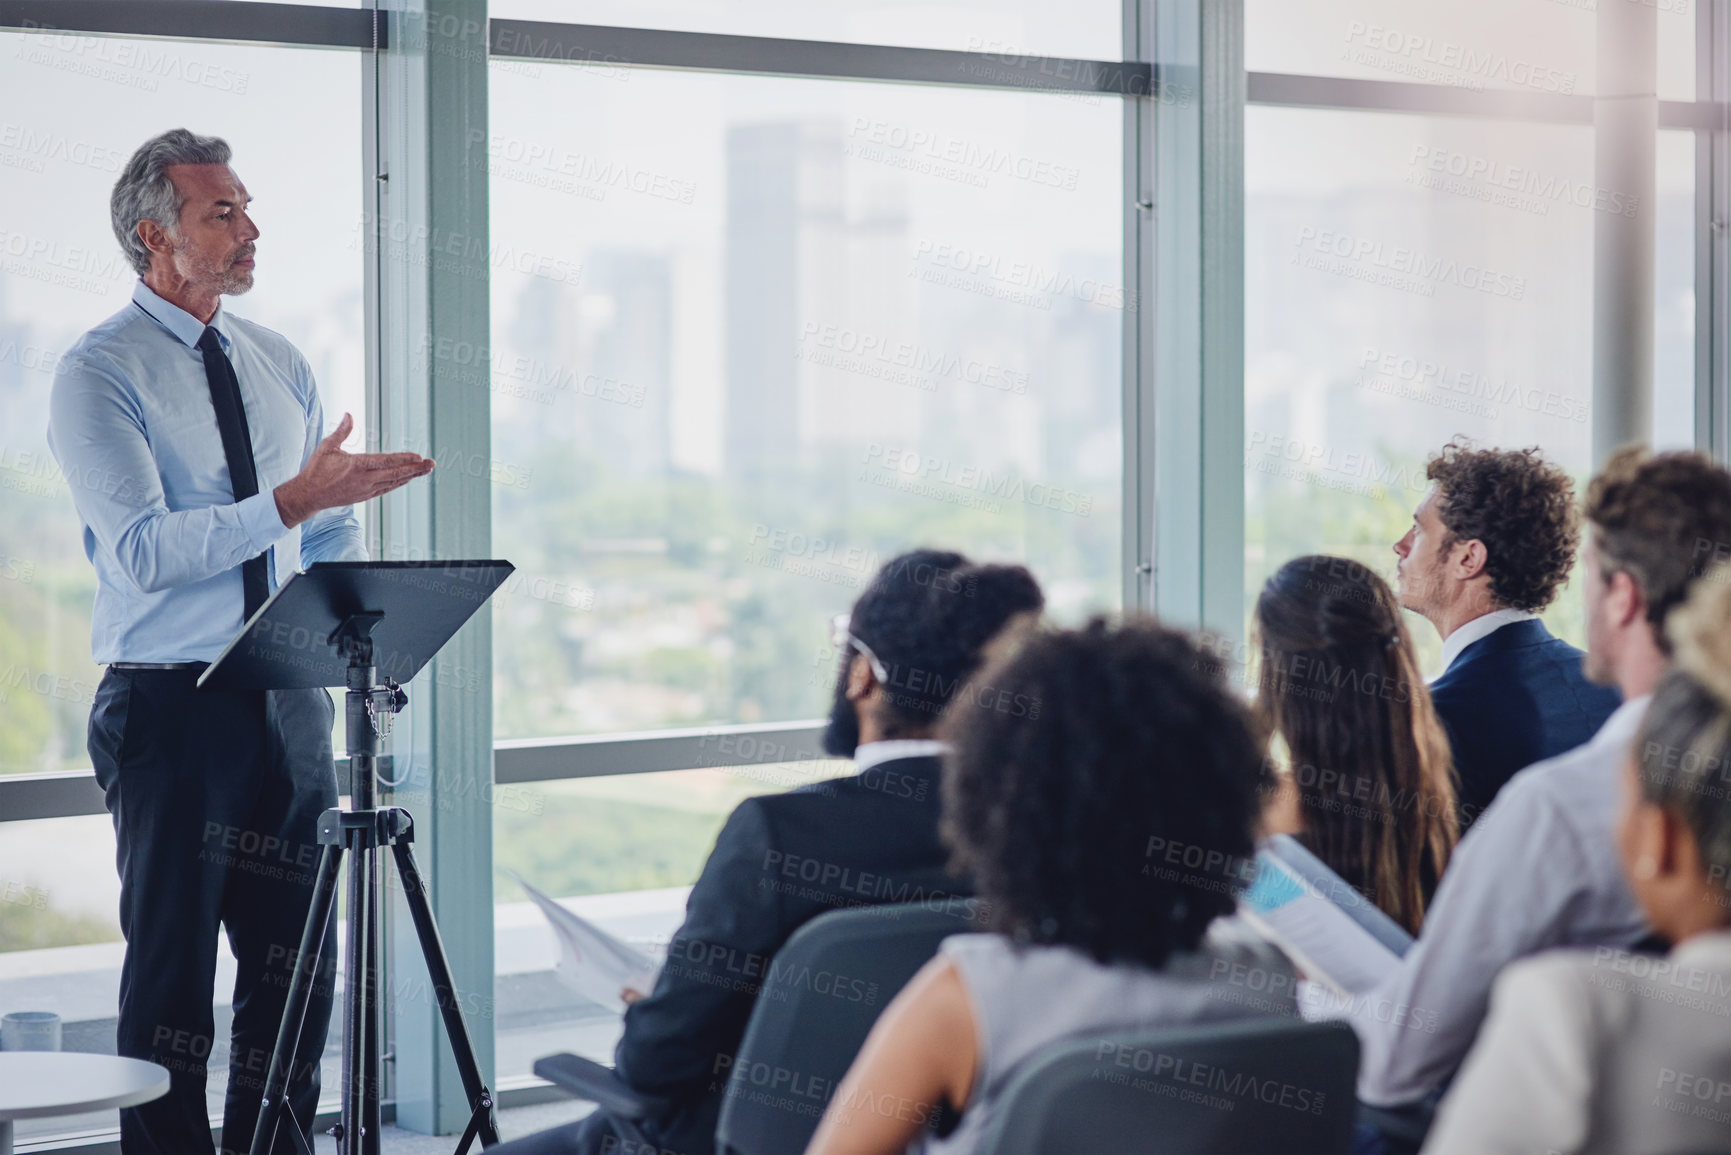 Buy stock photo High angle shot of a handsome mature male speaker addressing a group of businesspeople during a seminar in the conference room